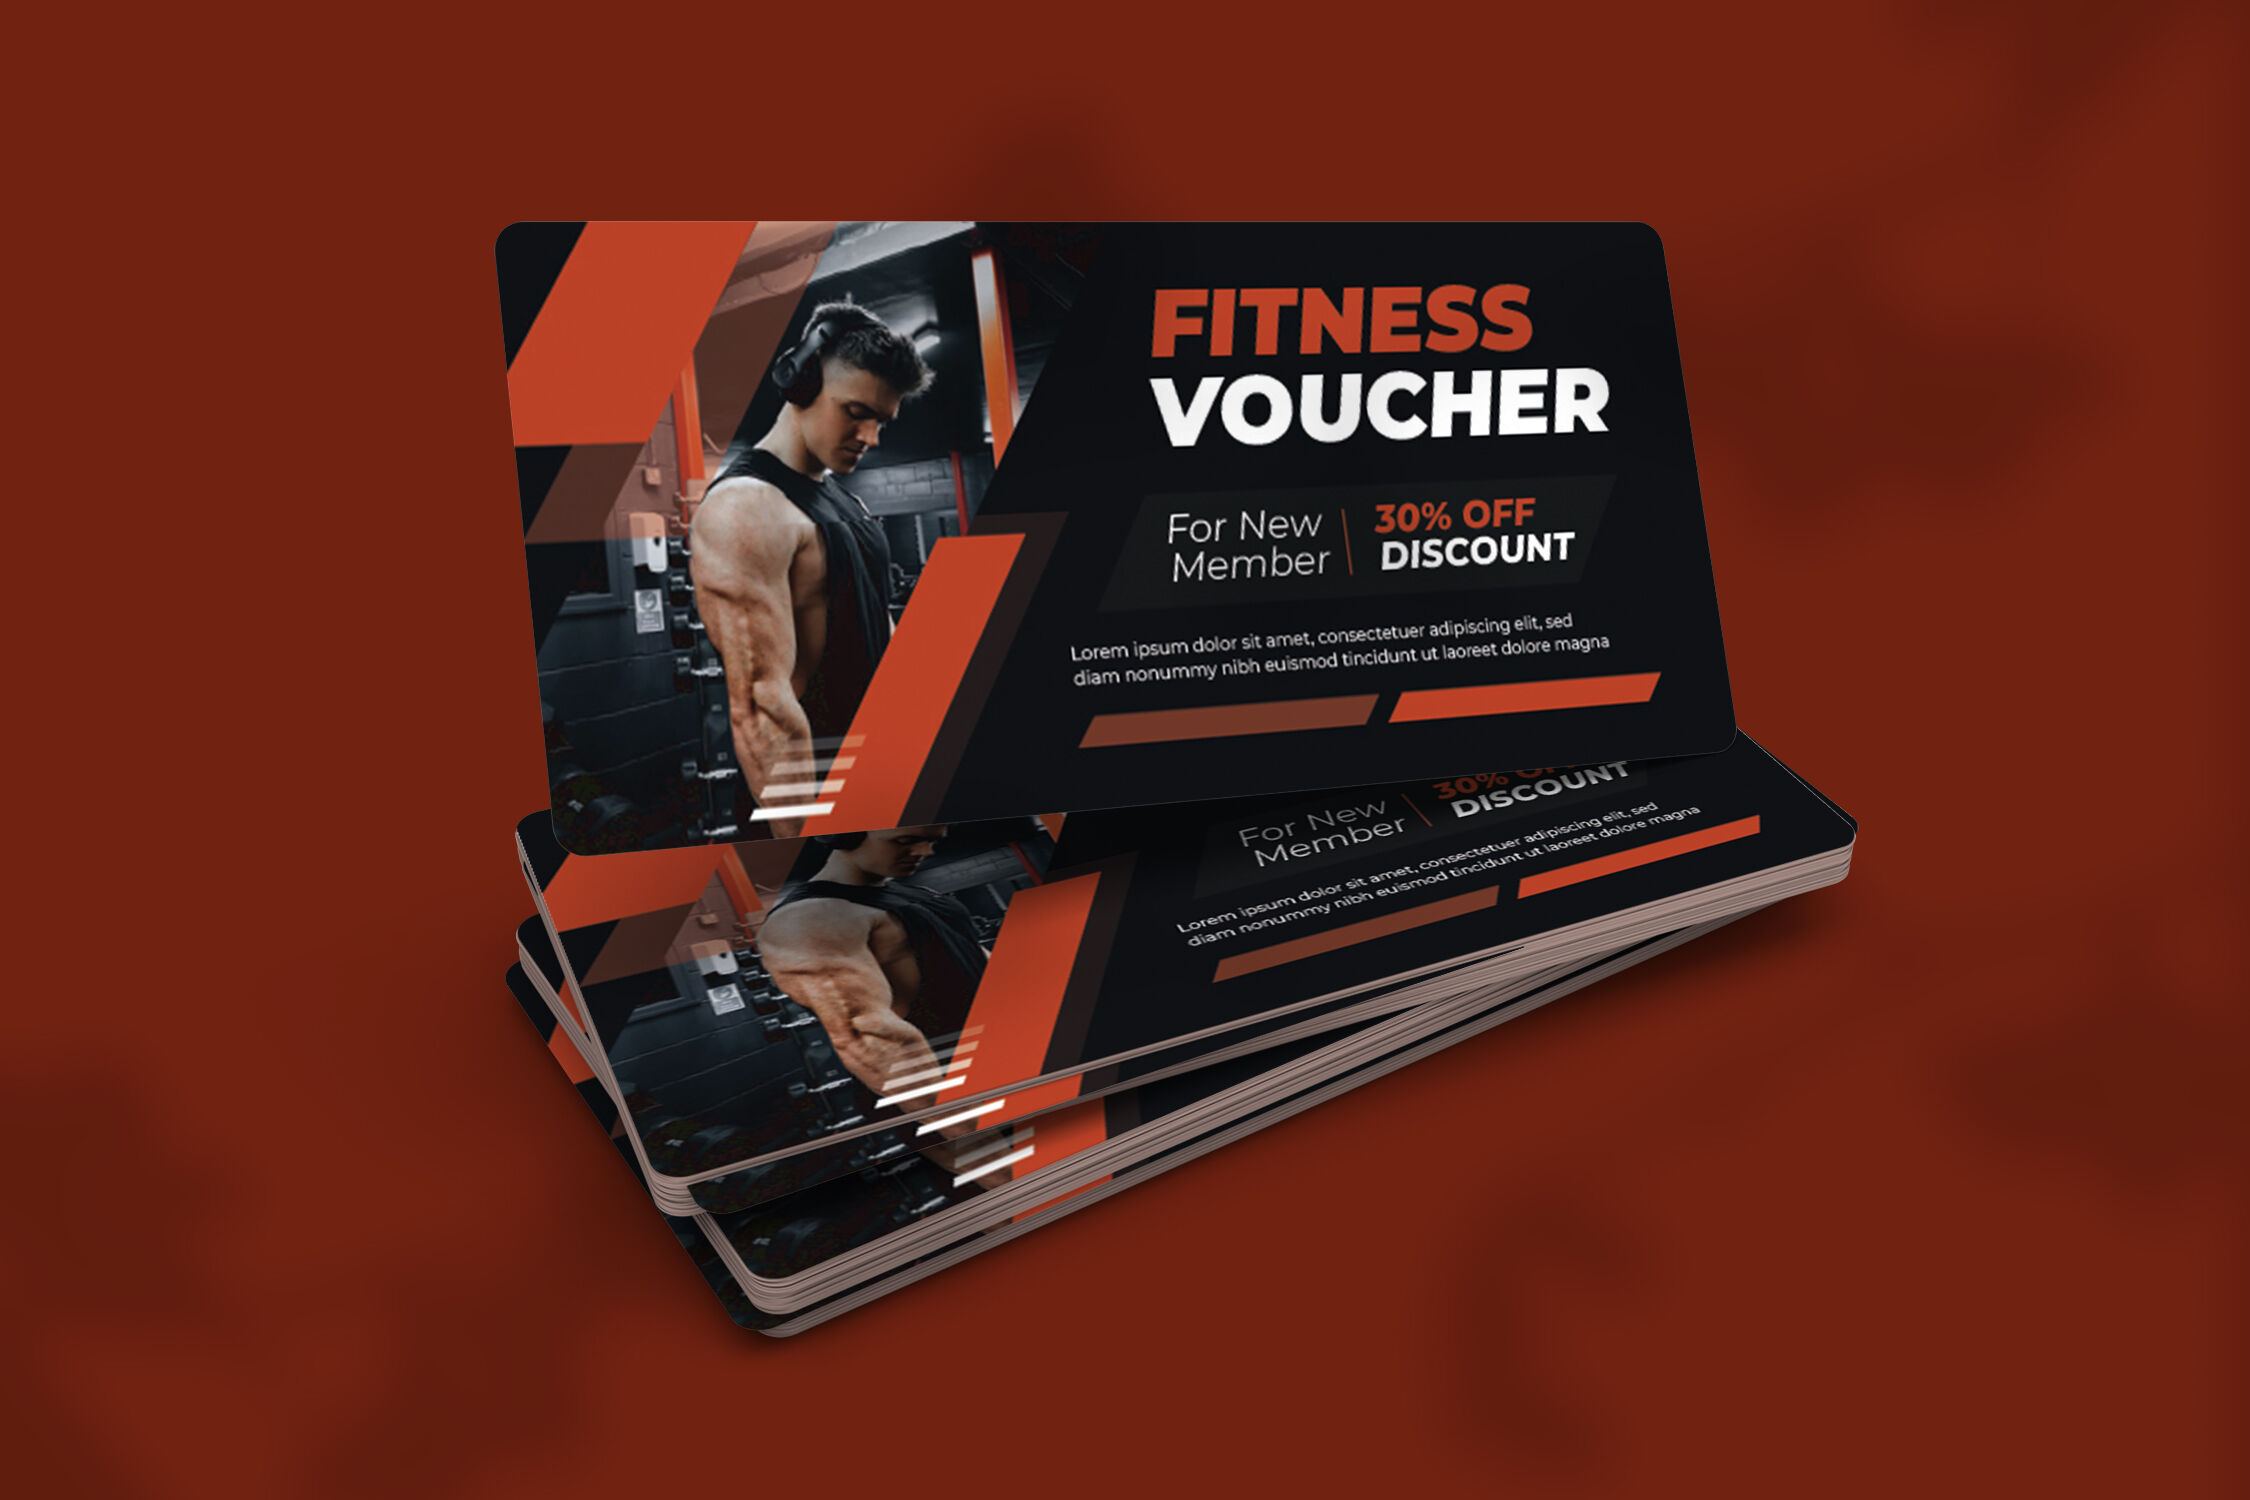 Gym Gift Voucher Template Graphic by Ju Design · Creative Fabrica